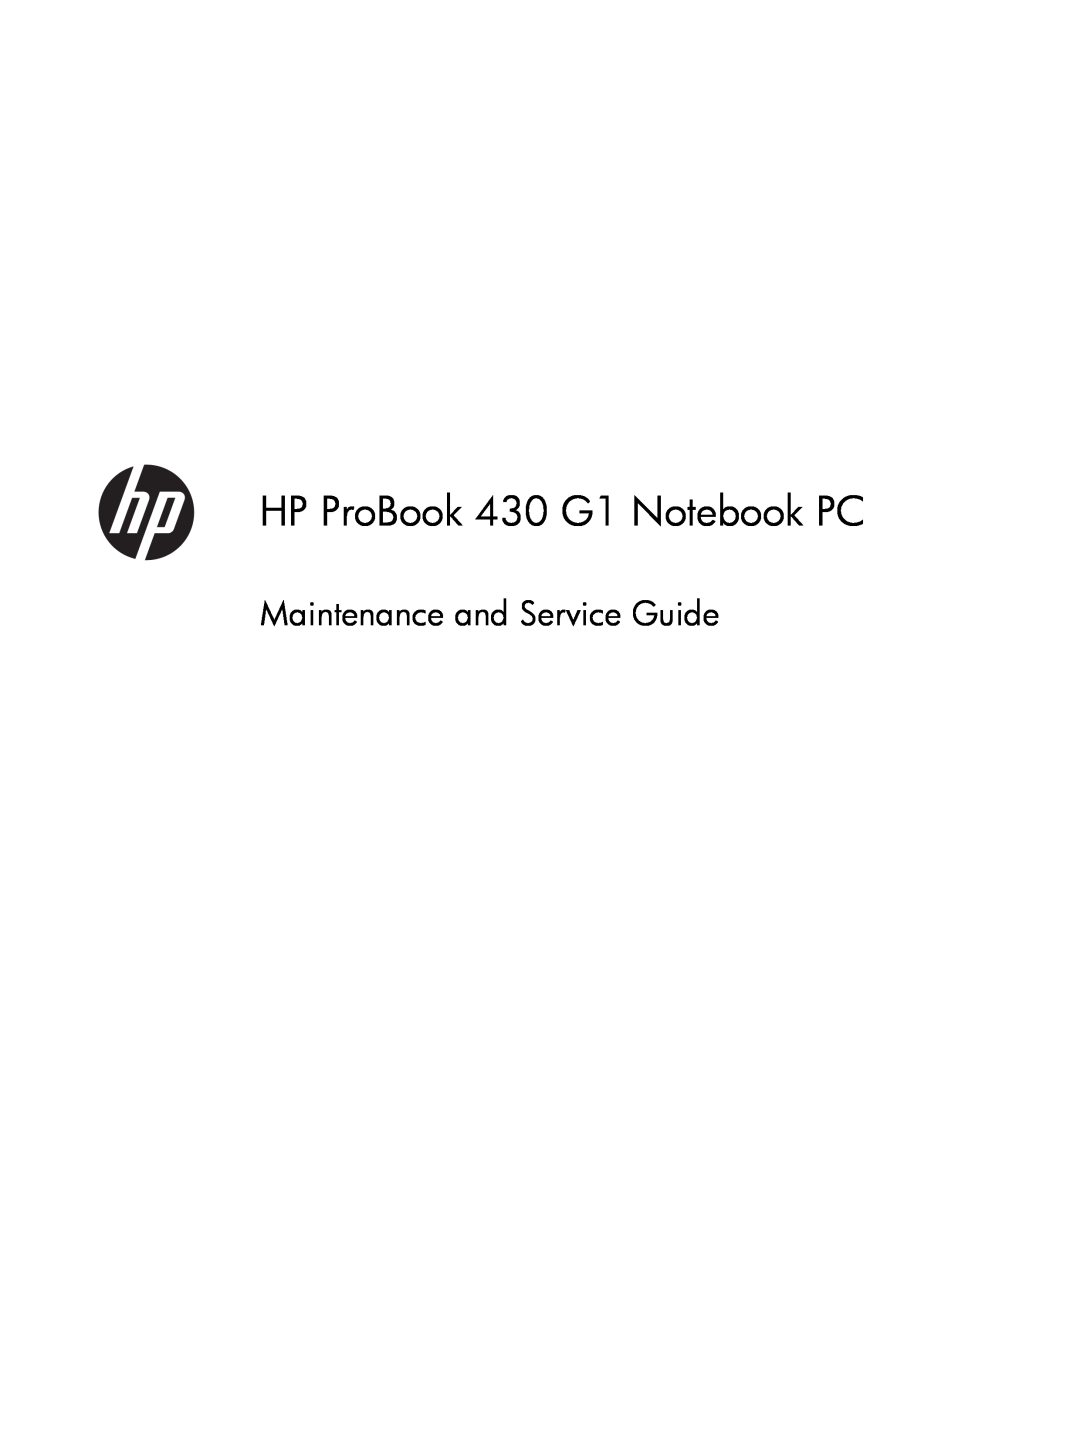 HP 430 G1 E3U87UTABA, 430 G1 E3U85UTABA manual HP ProBook 430 G1 Notebook PC, Maintenance and Service Guide 